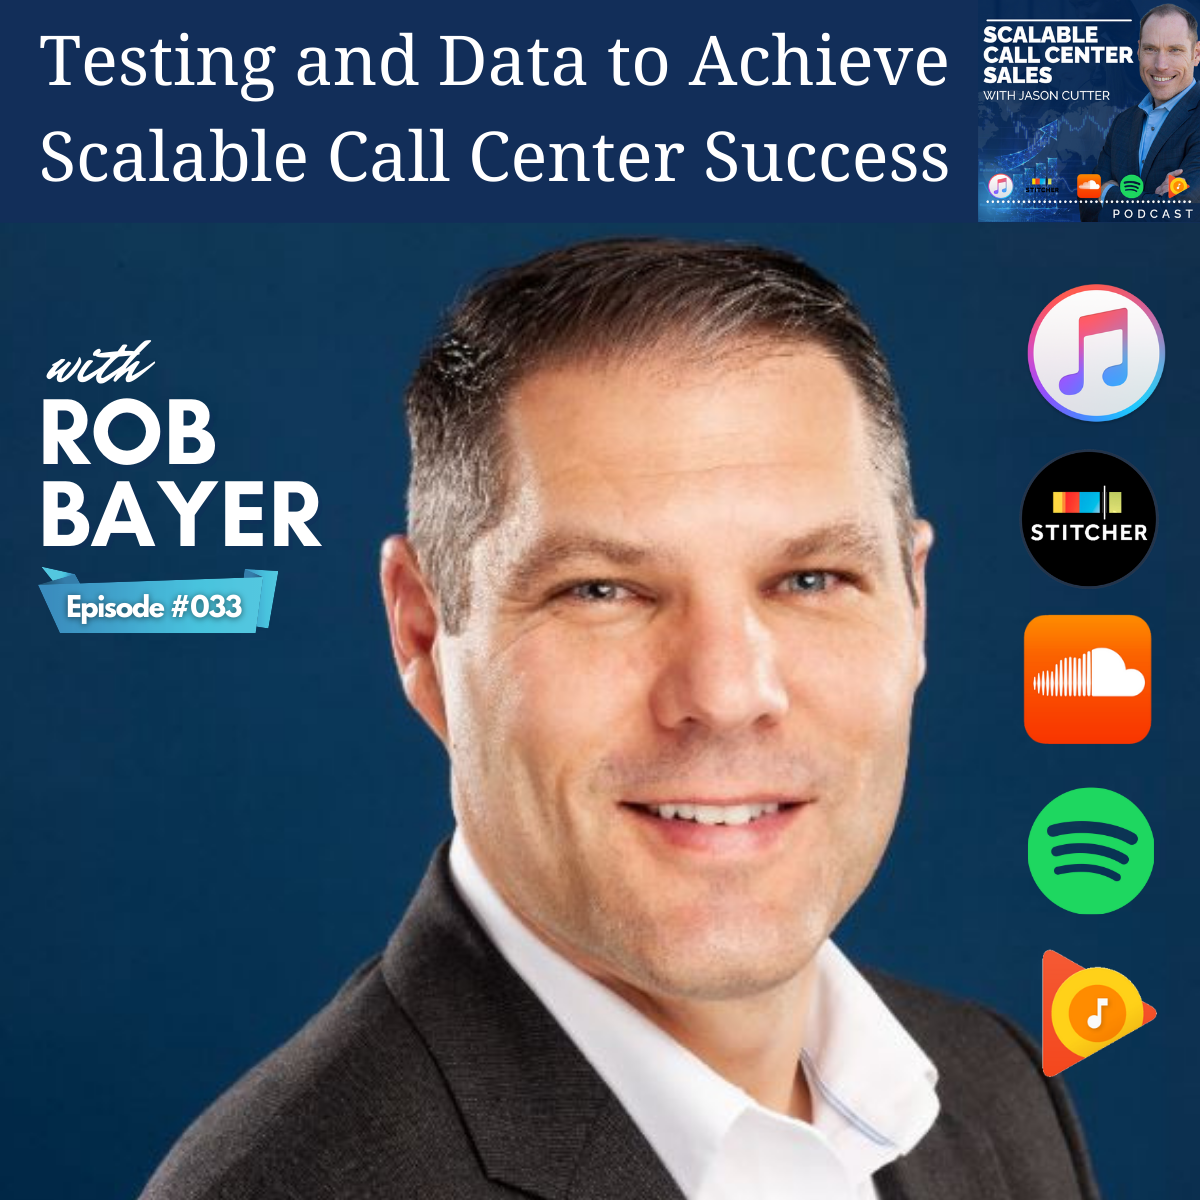 [033] Testing and Data to Achieve Scalable Call Center Success, with Rob Bayer from Anomaly Squared